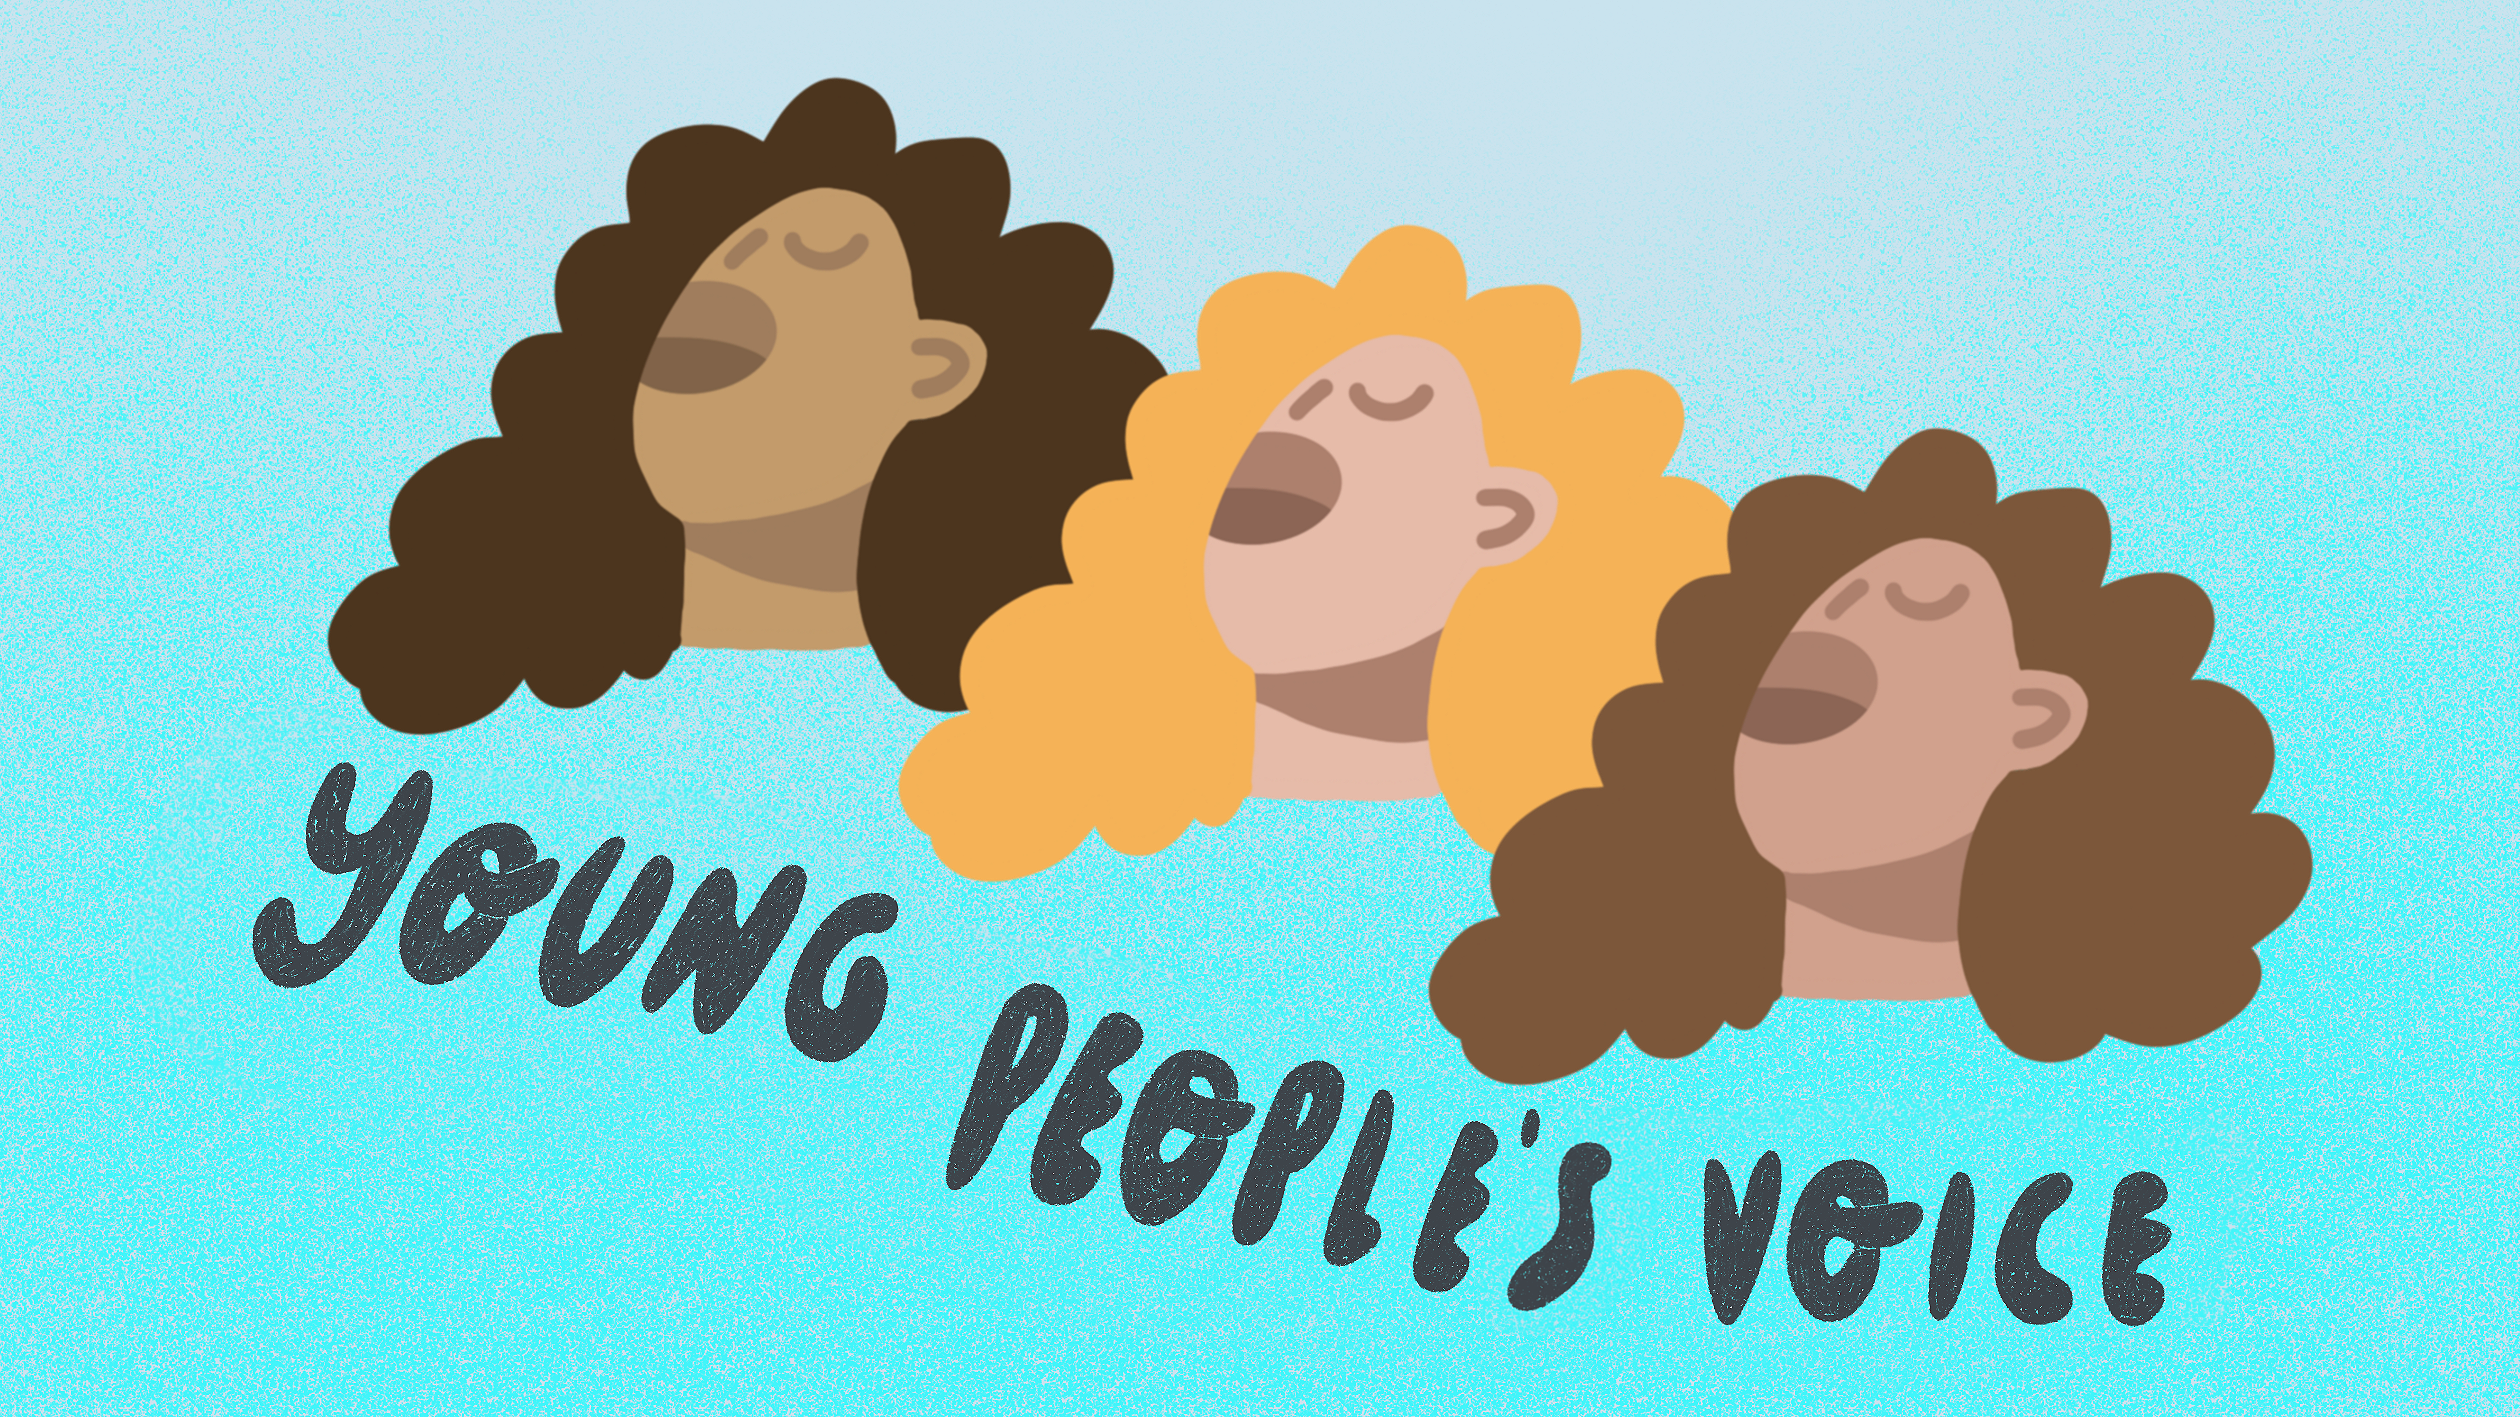 Young people's voice